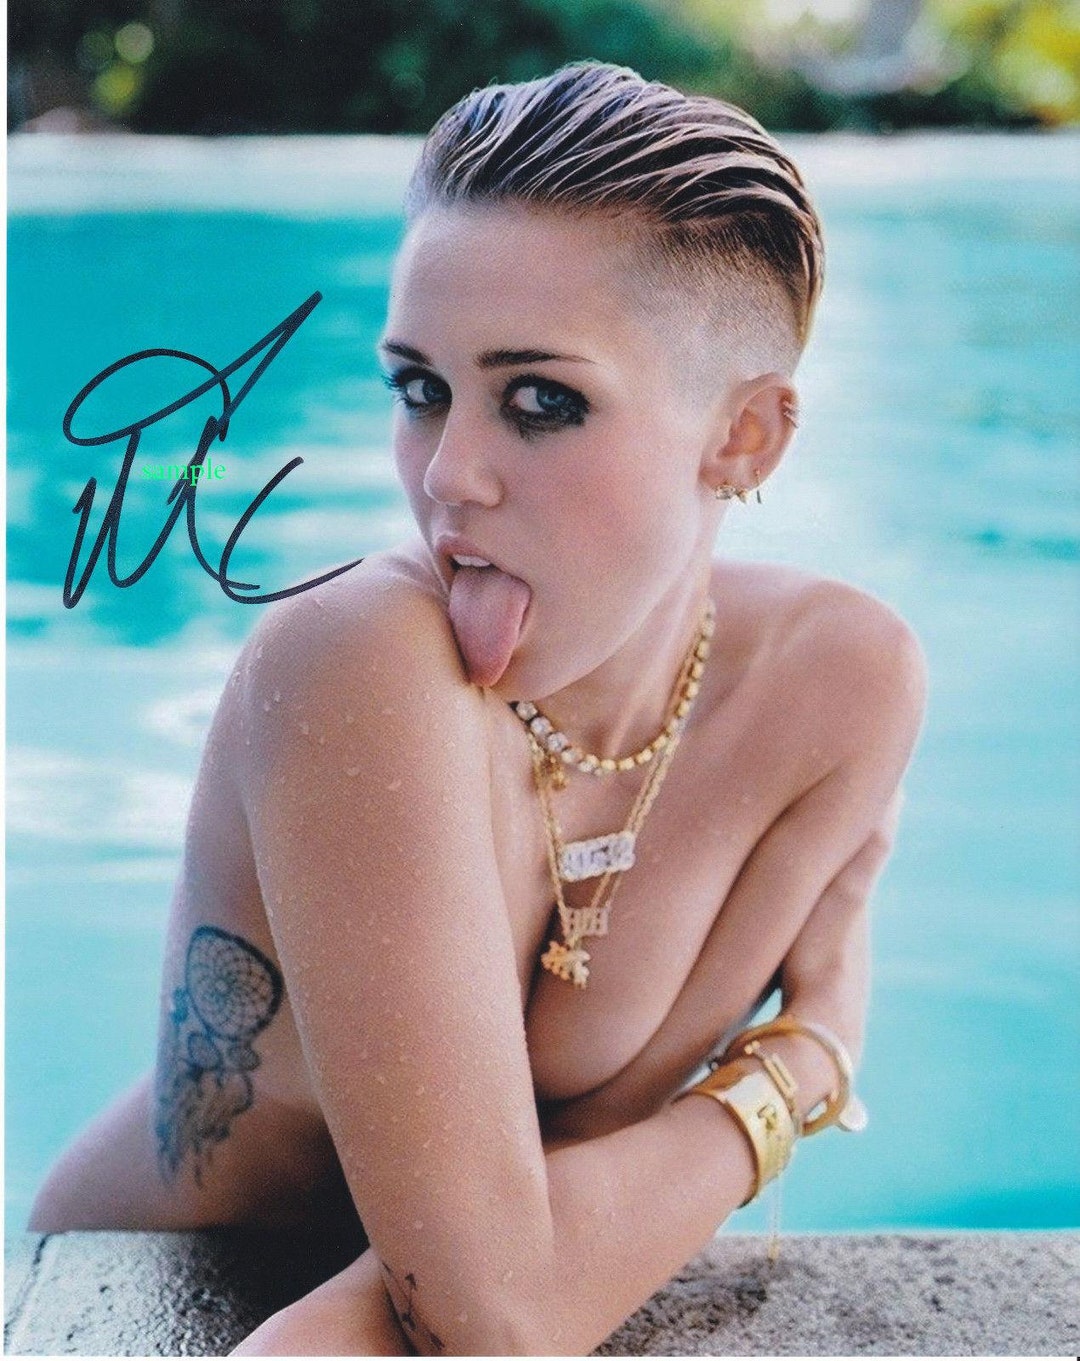 MILEY CYRUS 2 Reprint 8X10 Signed Autographed Photo Picture - Etsy